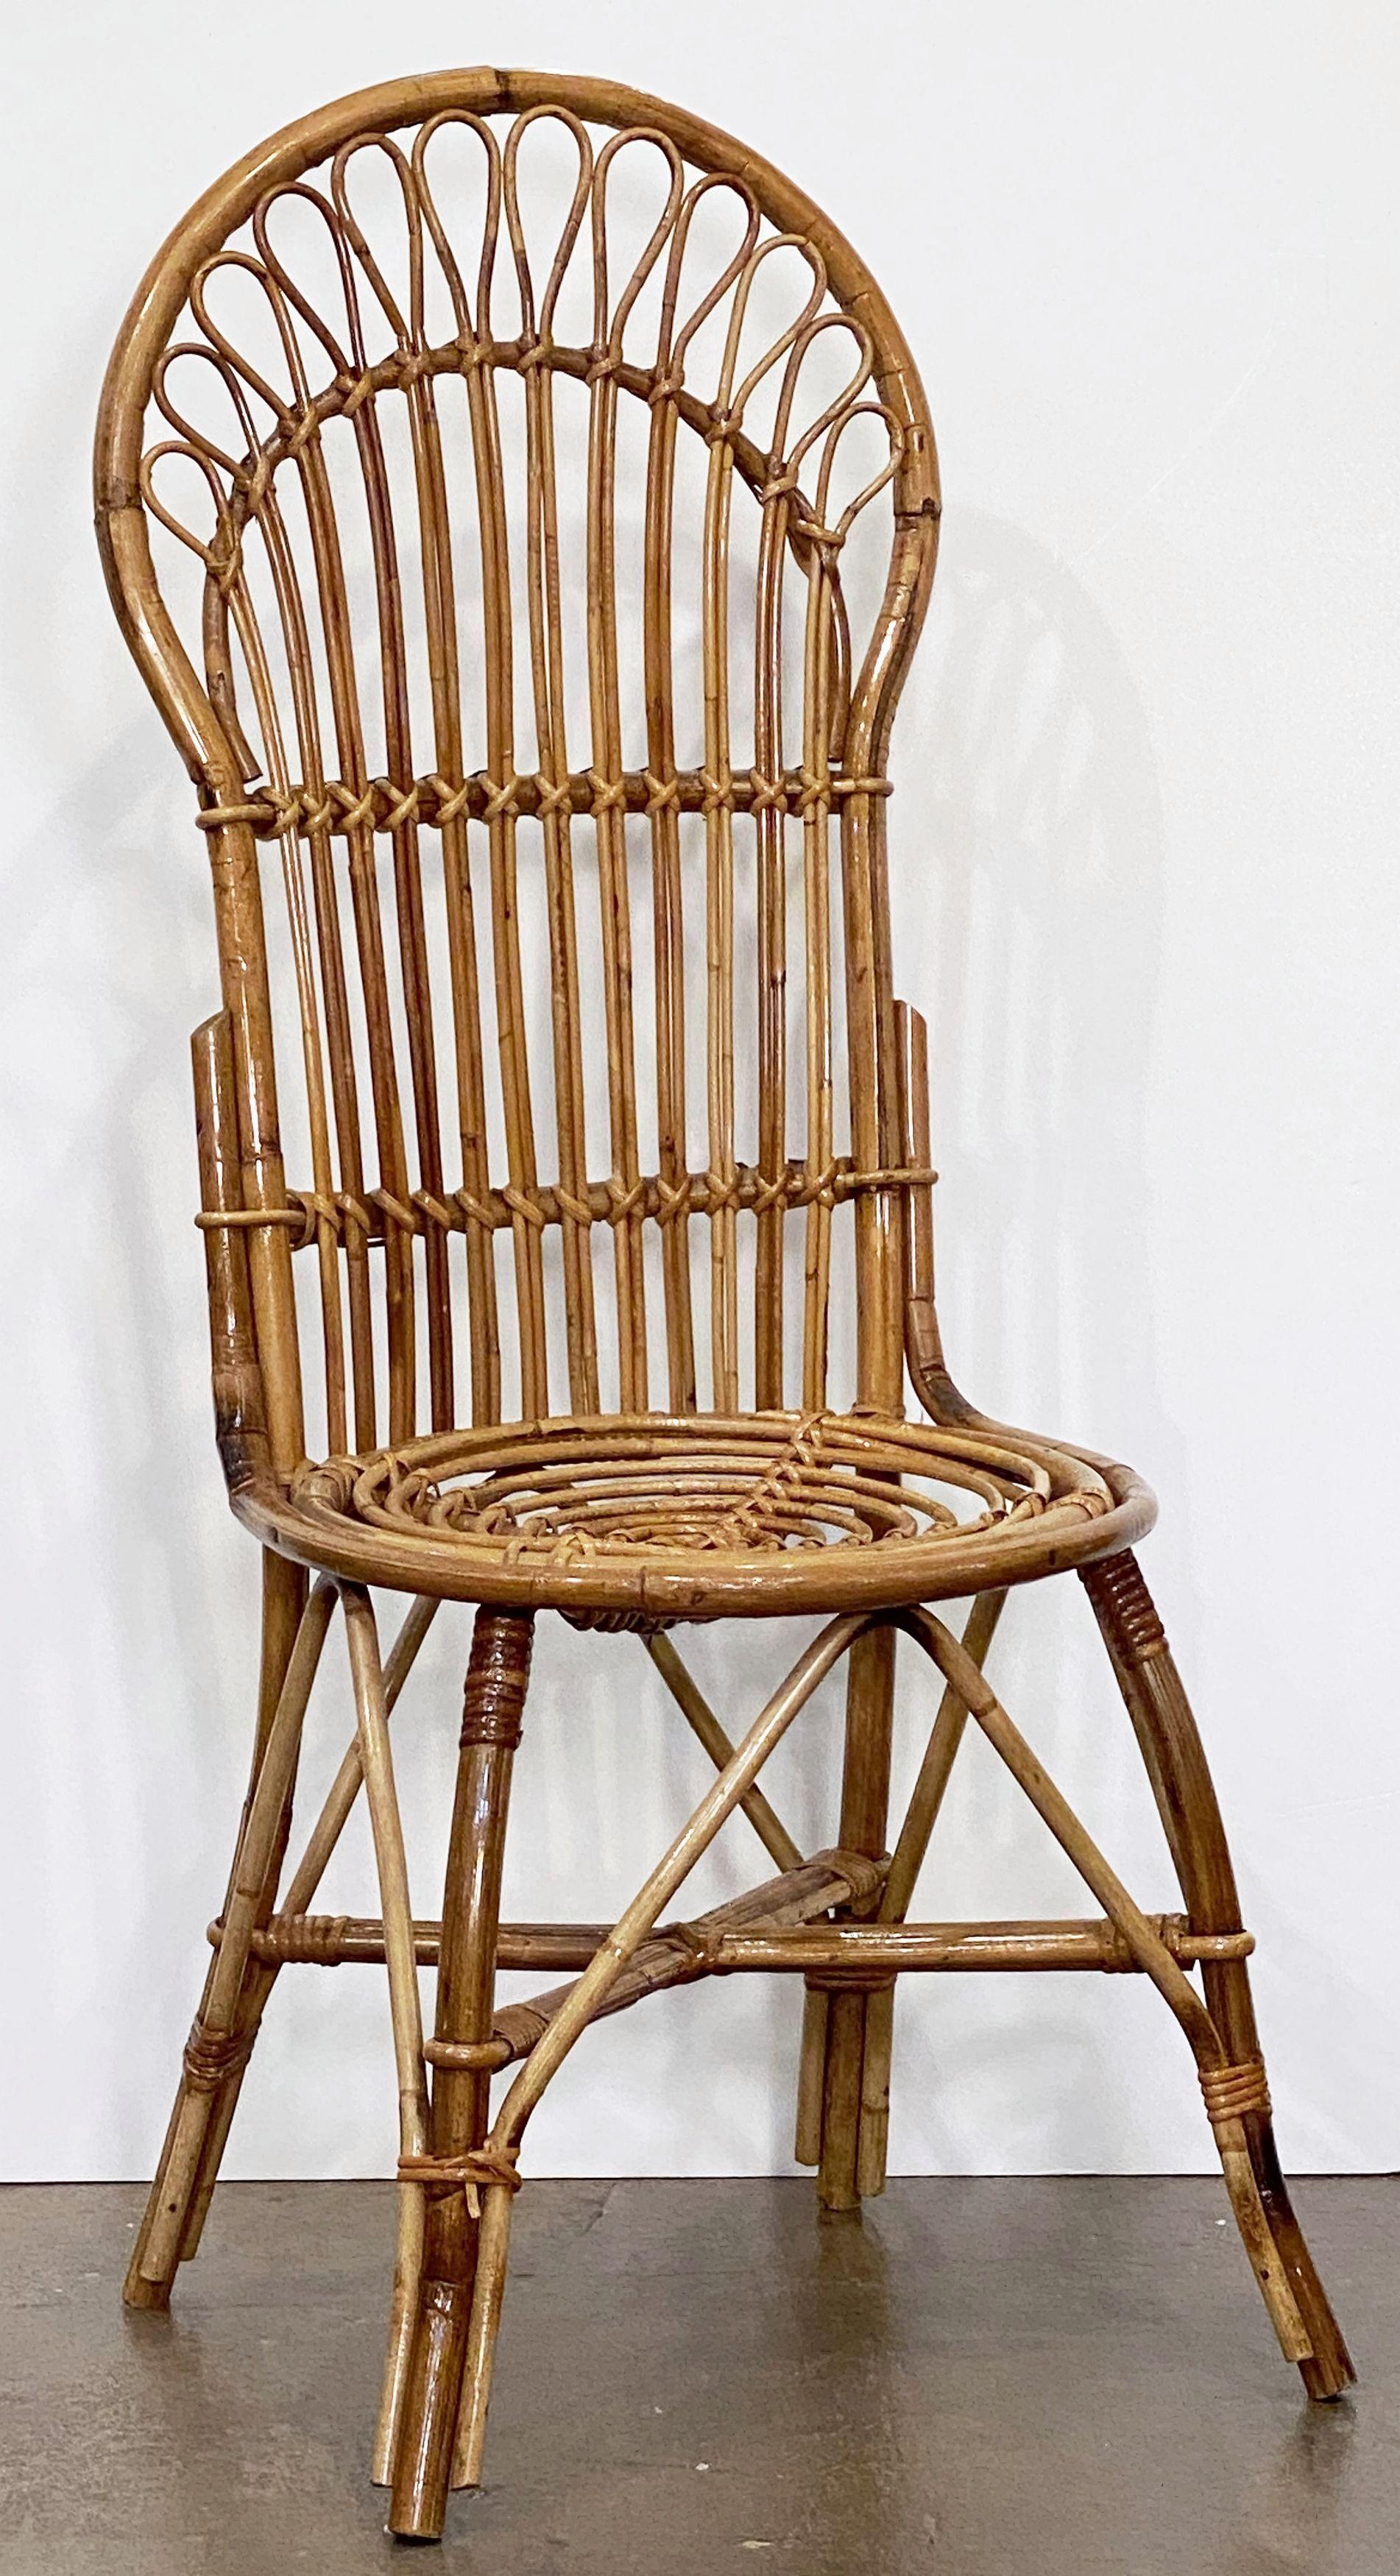 A fine vintage Italian fan-backed chair from the Mid-20th century of woven rattan and bamboo featuring a stylish design to the back, seat, and legs.

Two available - Please enquire